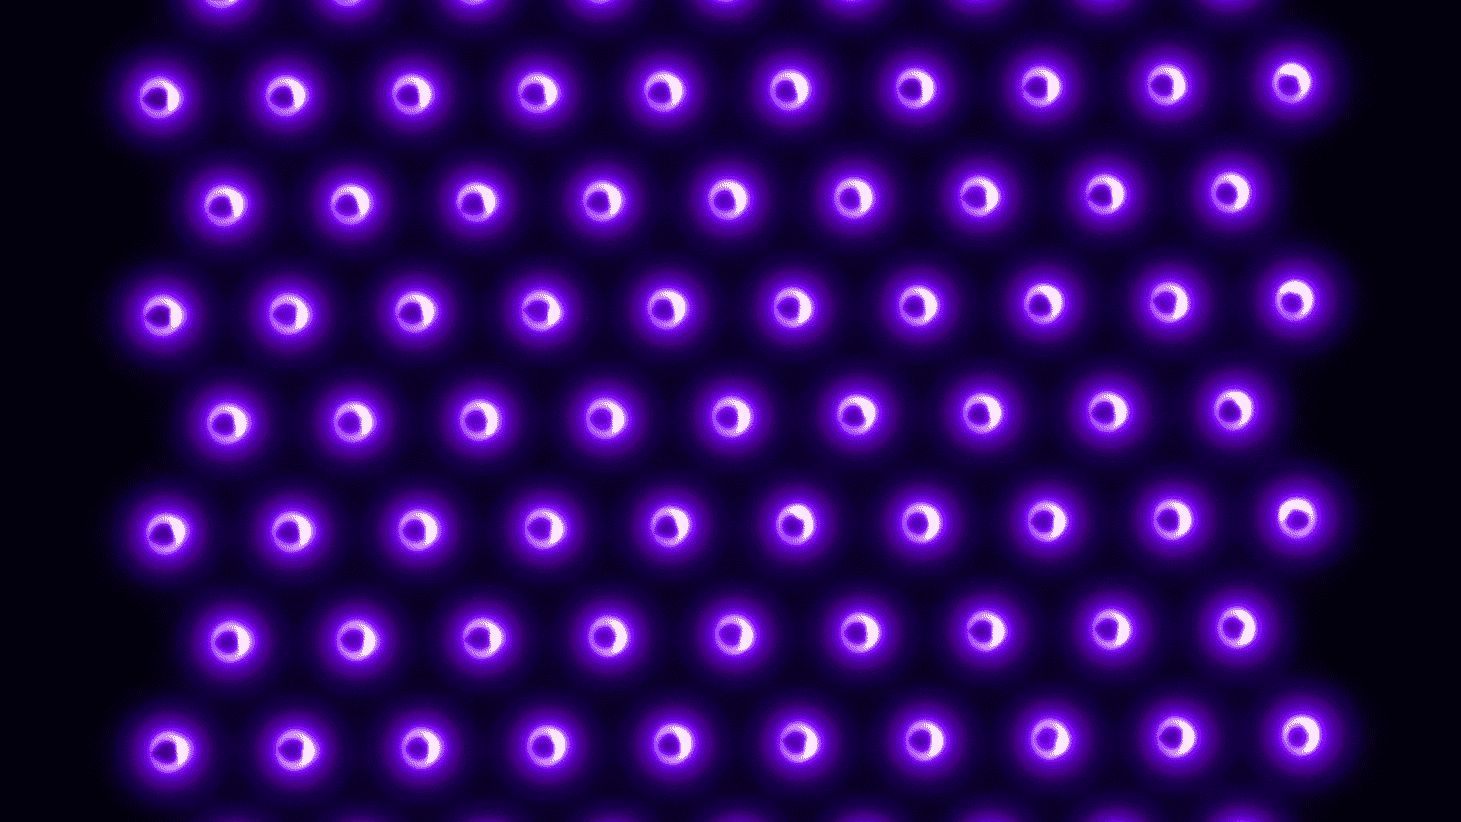 U of M researchers are testing the efficacy of various plasma sources, including a 2D integrated coaxial micro hollow dielectric barrier plasma discharge array. Plasma (purple) is produced inside the holes of the array, through which air is blown. This plasma source has been productively breaking down various viruses&mdash;the pathogens are inactivated when they come into contact with the air coming through the holes in the array.
